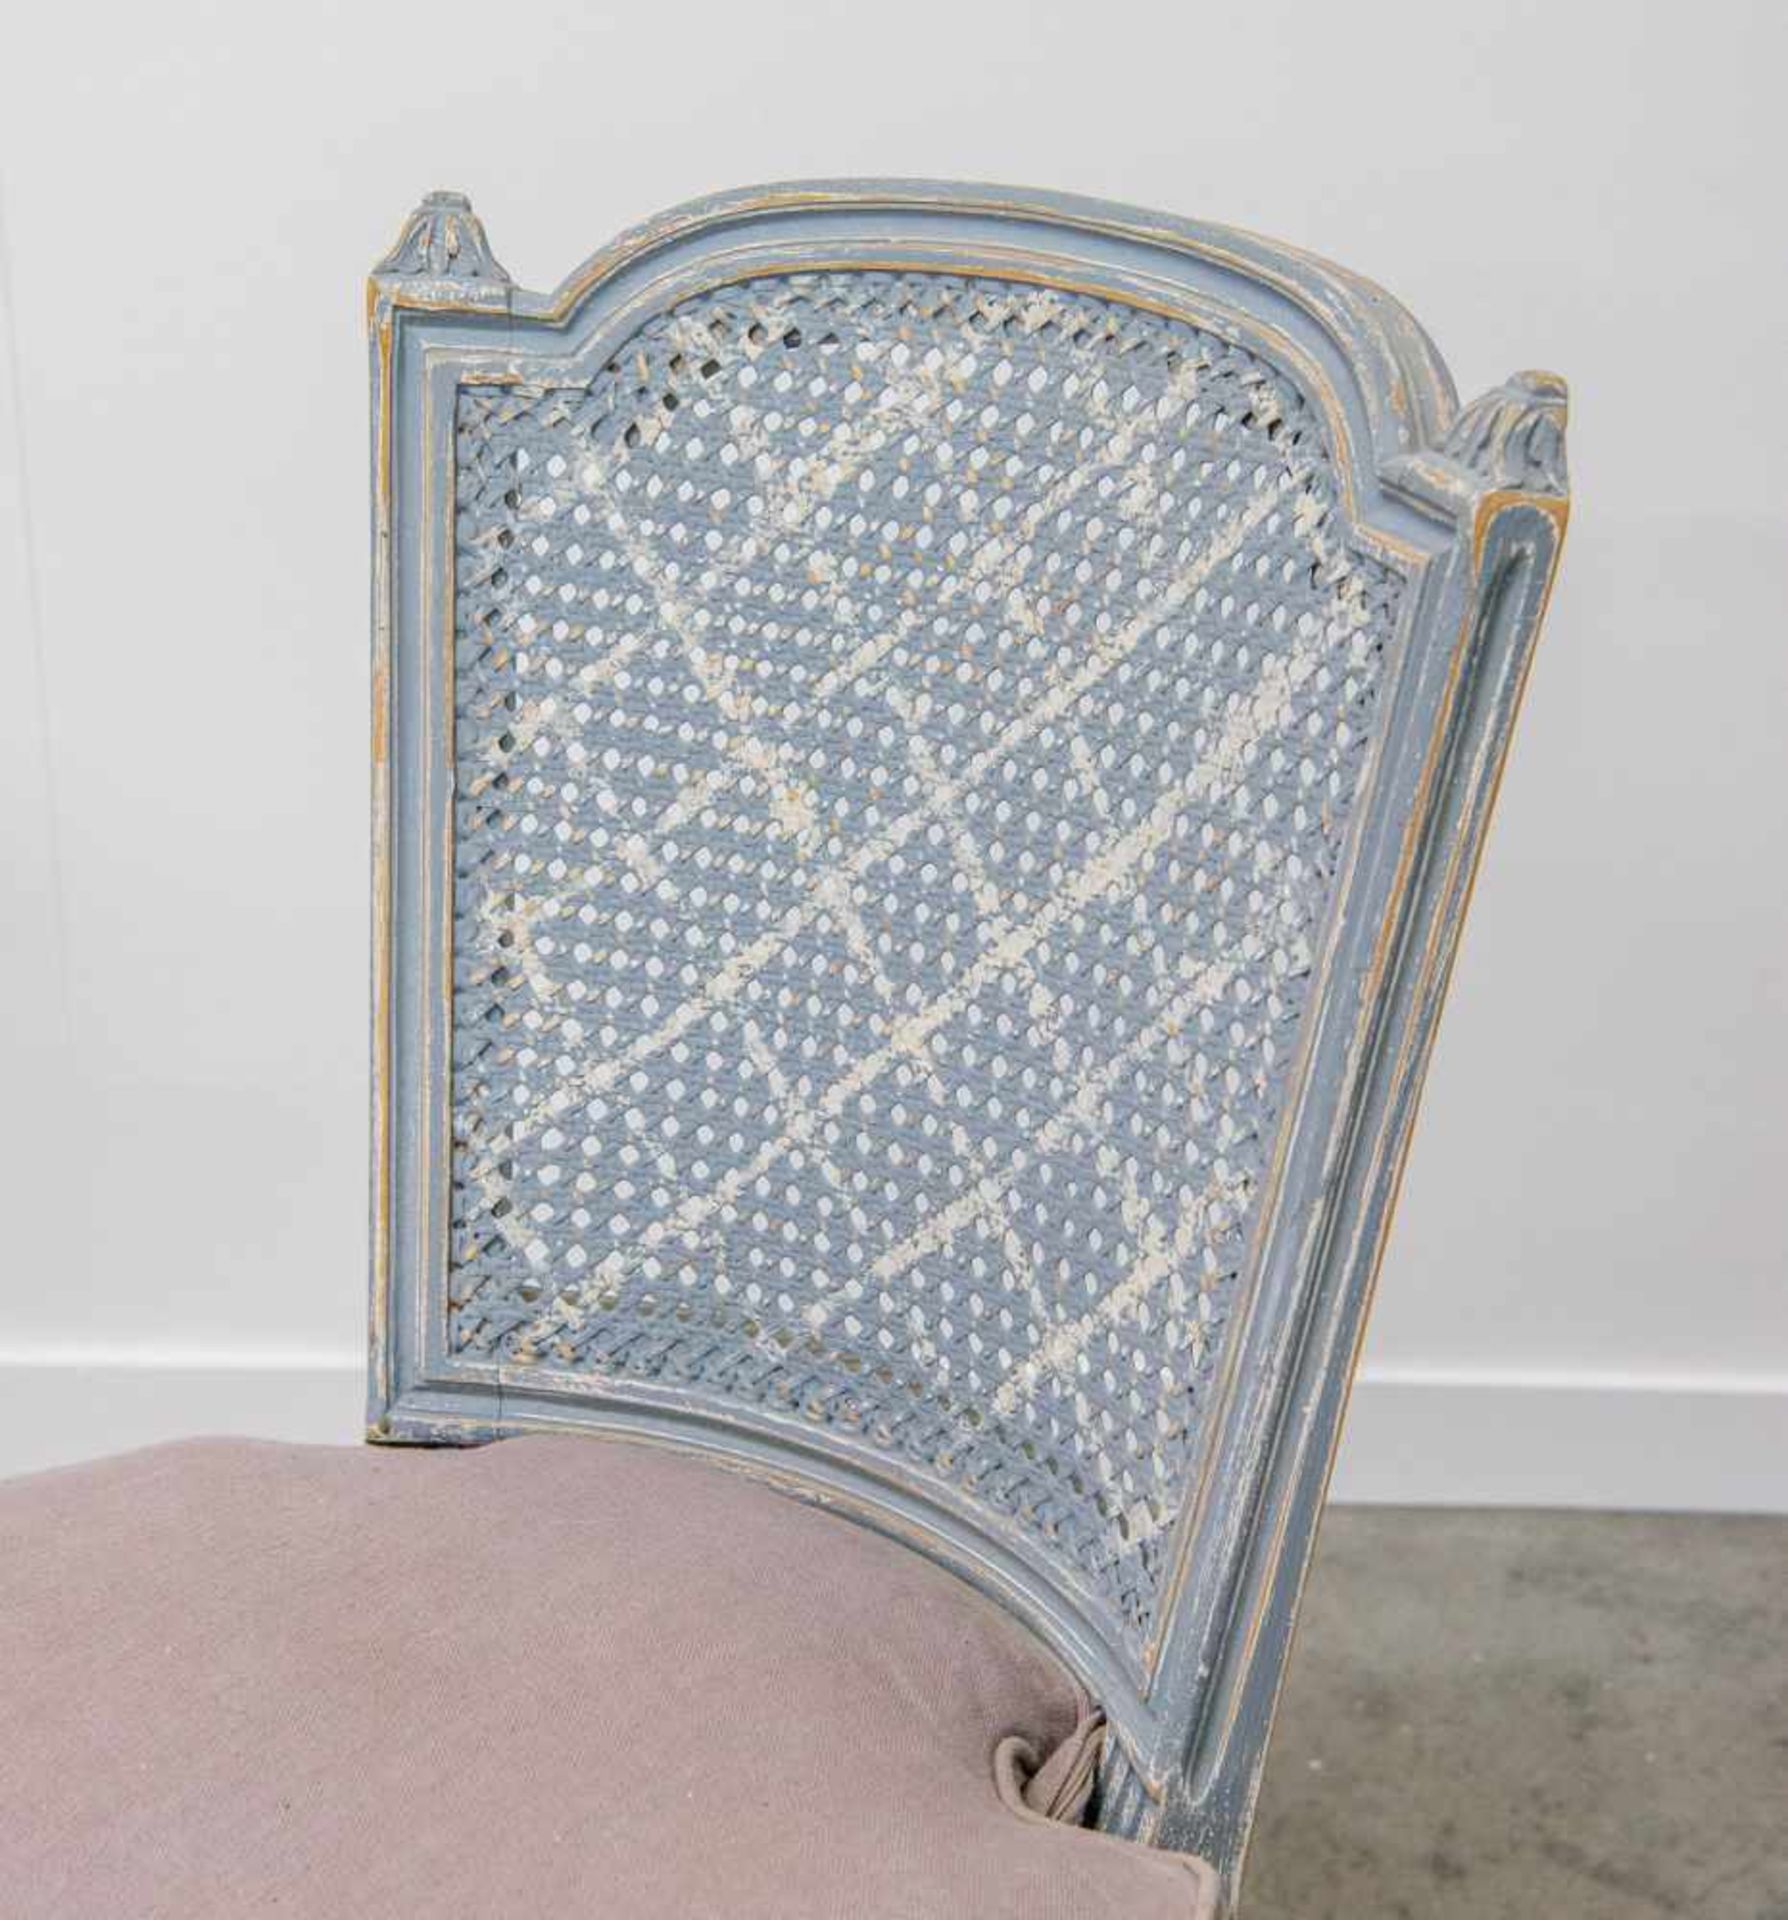 Set of 6 chairs in Louis XVI style, patinated blue and finished with a cushion. (1 to restore) - Bild 5 aus 9